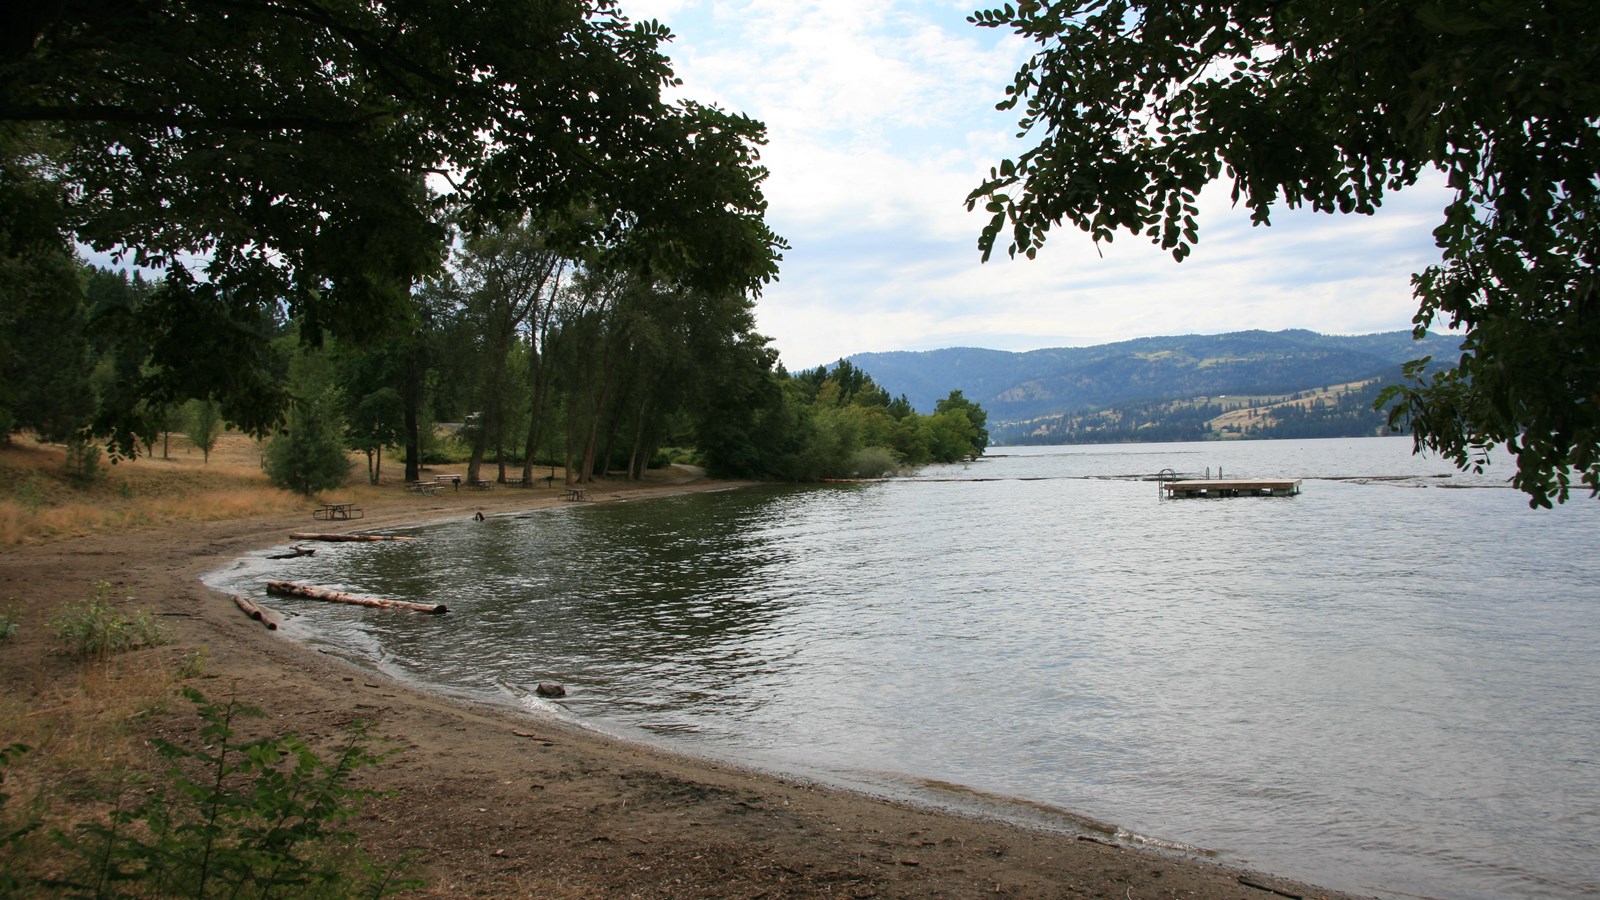 A view of a sheltered beach area, grass, trees, picnic tables, and the lake shore.